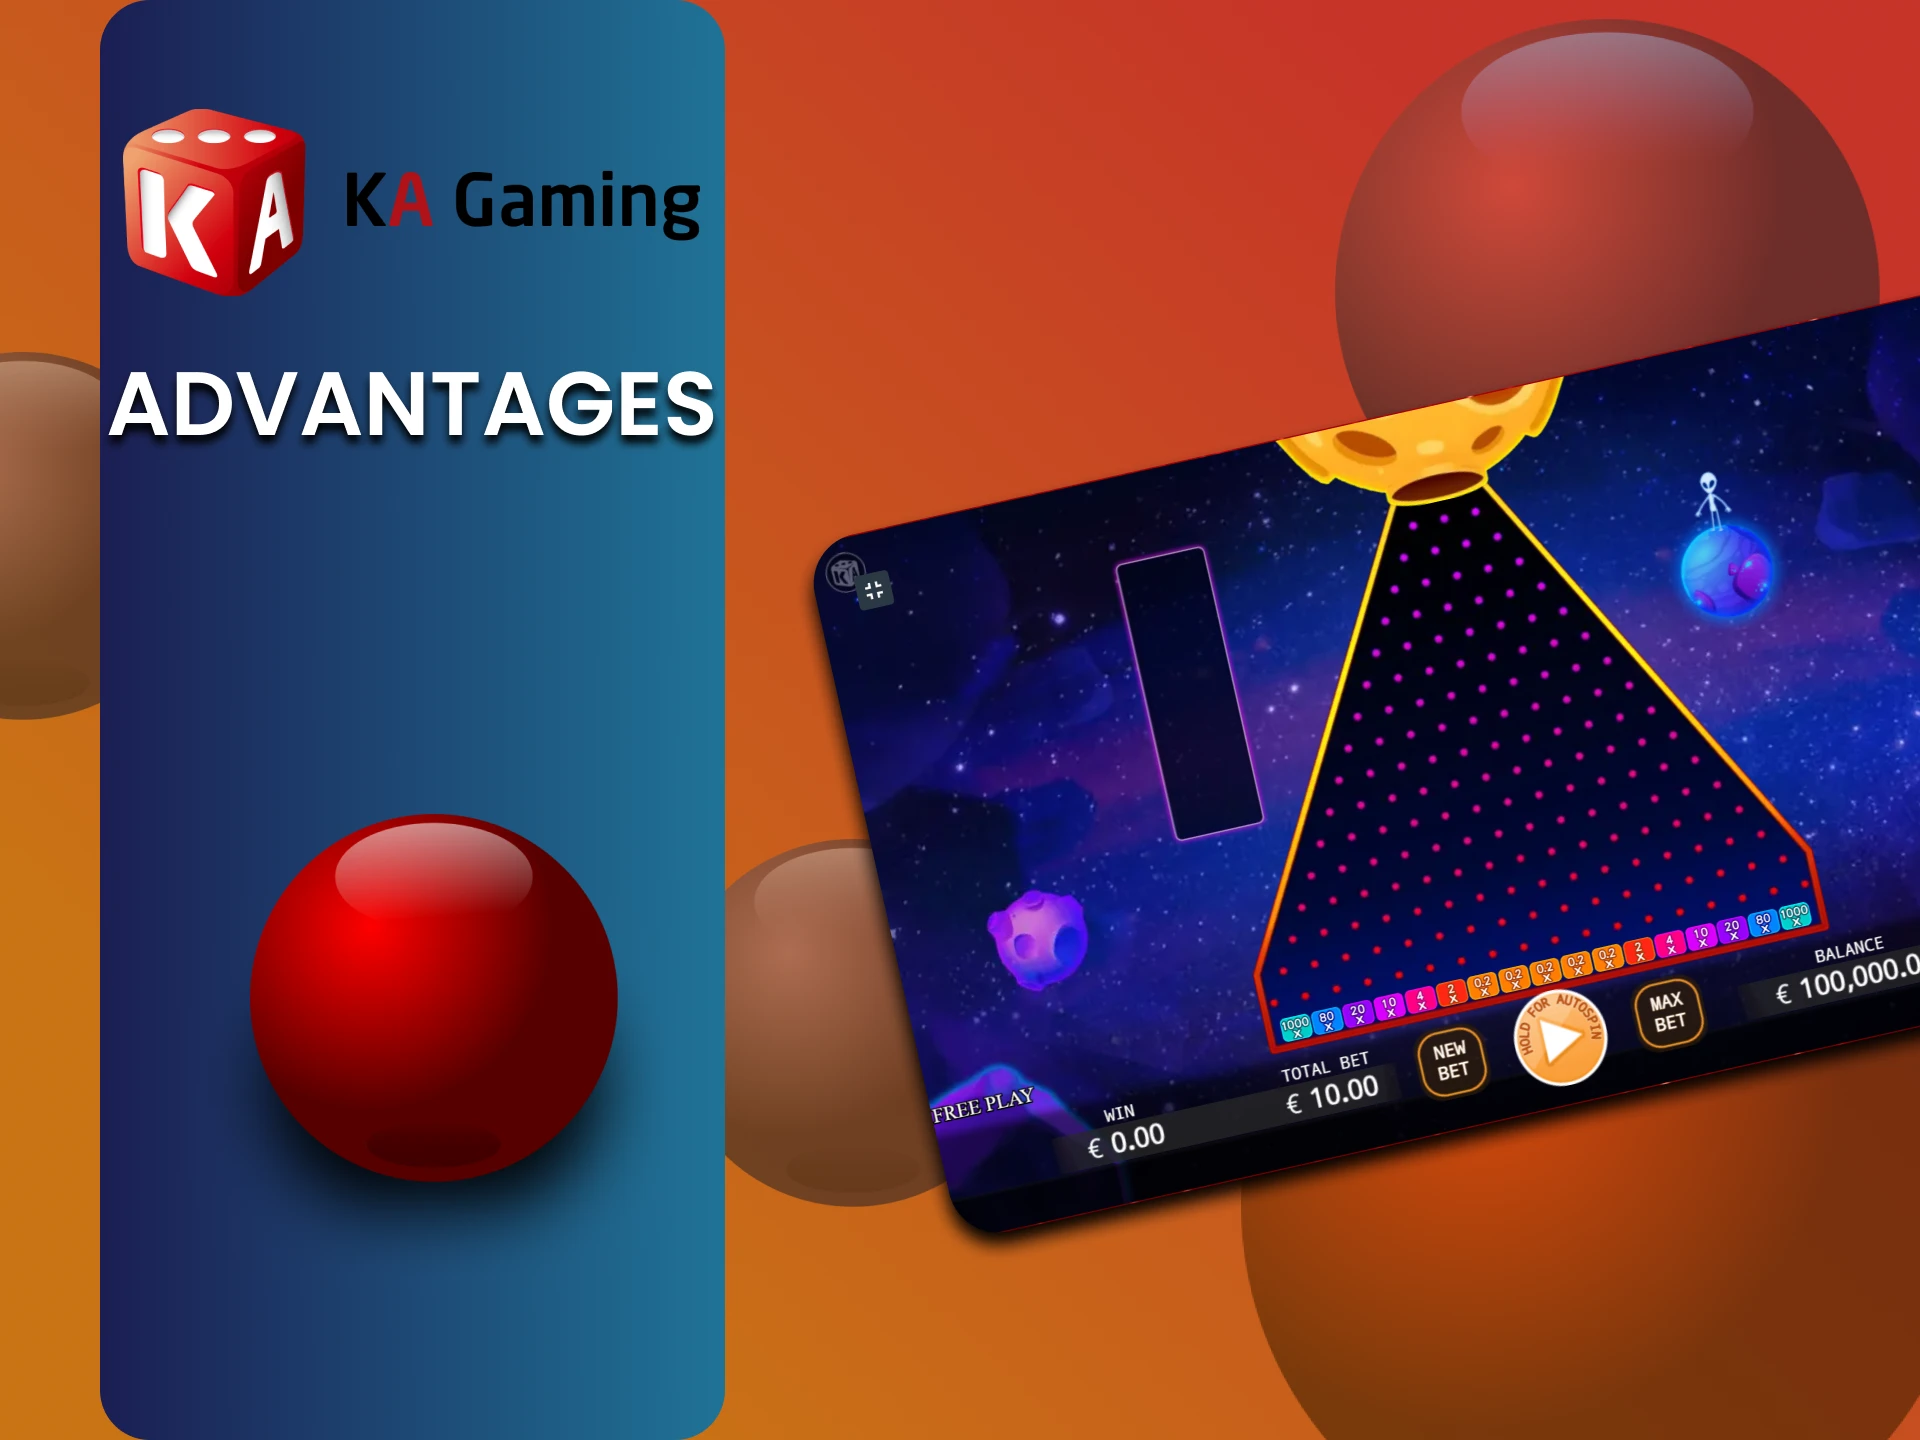 Find out what the KA Gaming provider is better at.